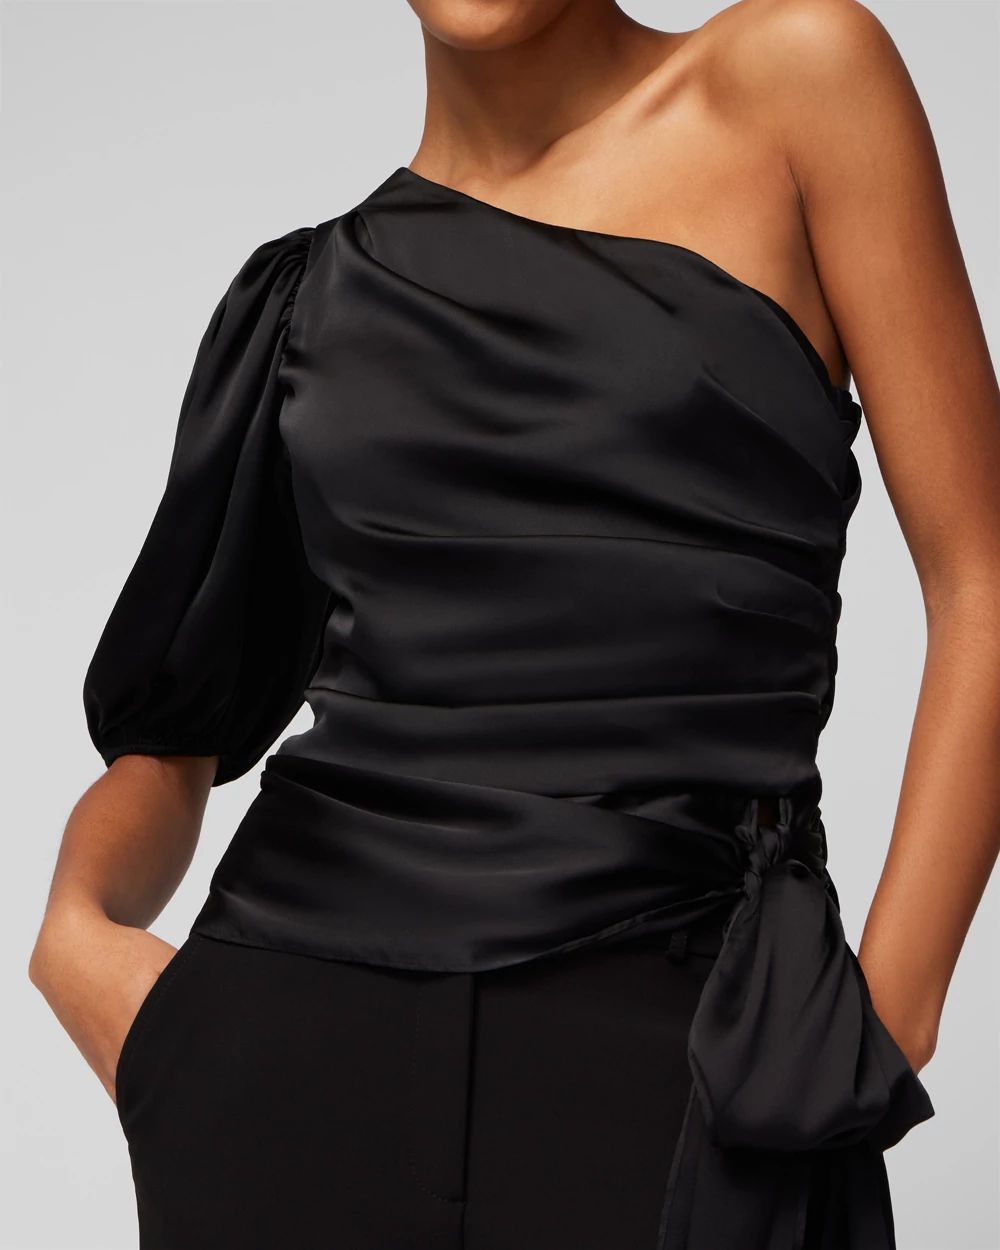 One Shoulder Satin Tie Blouse click to view larger image.